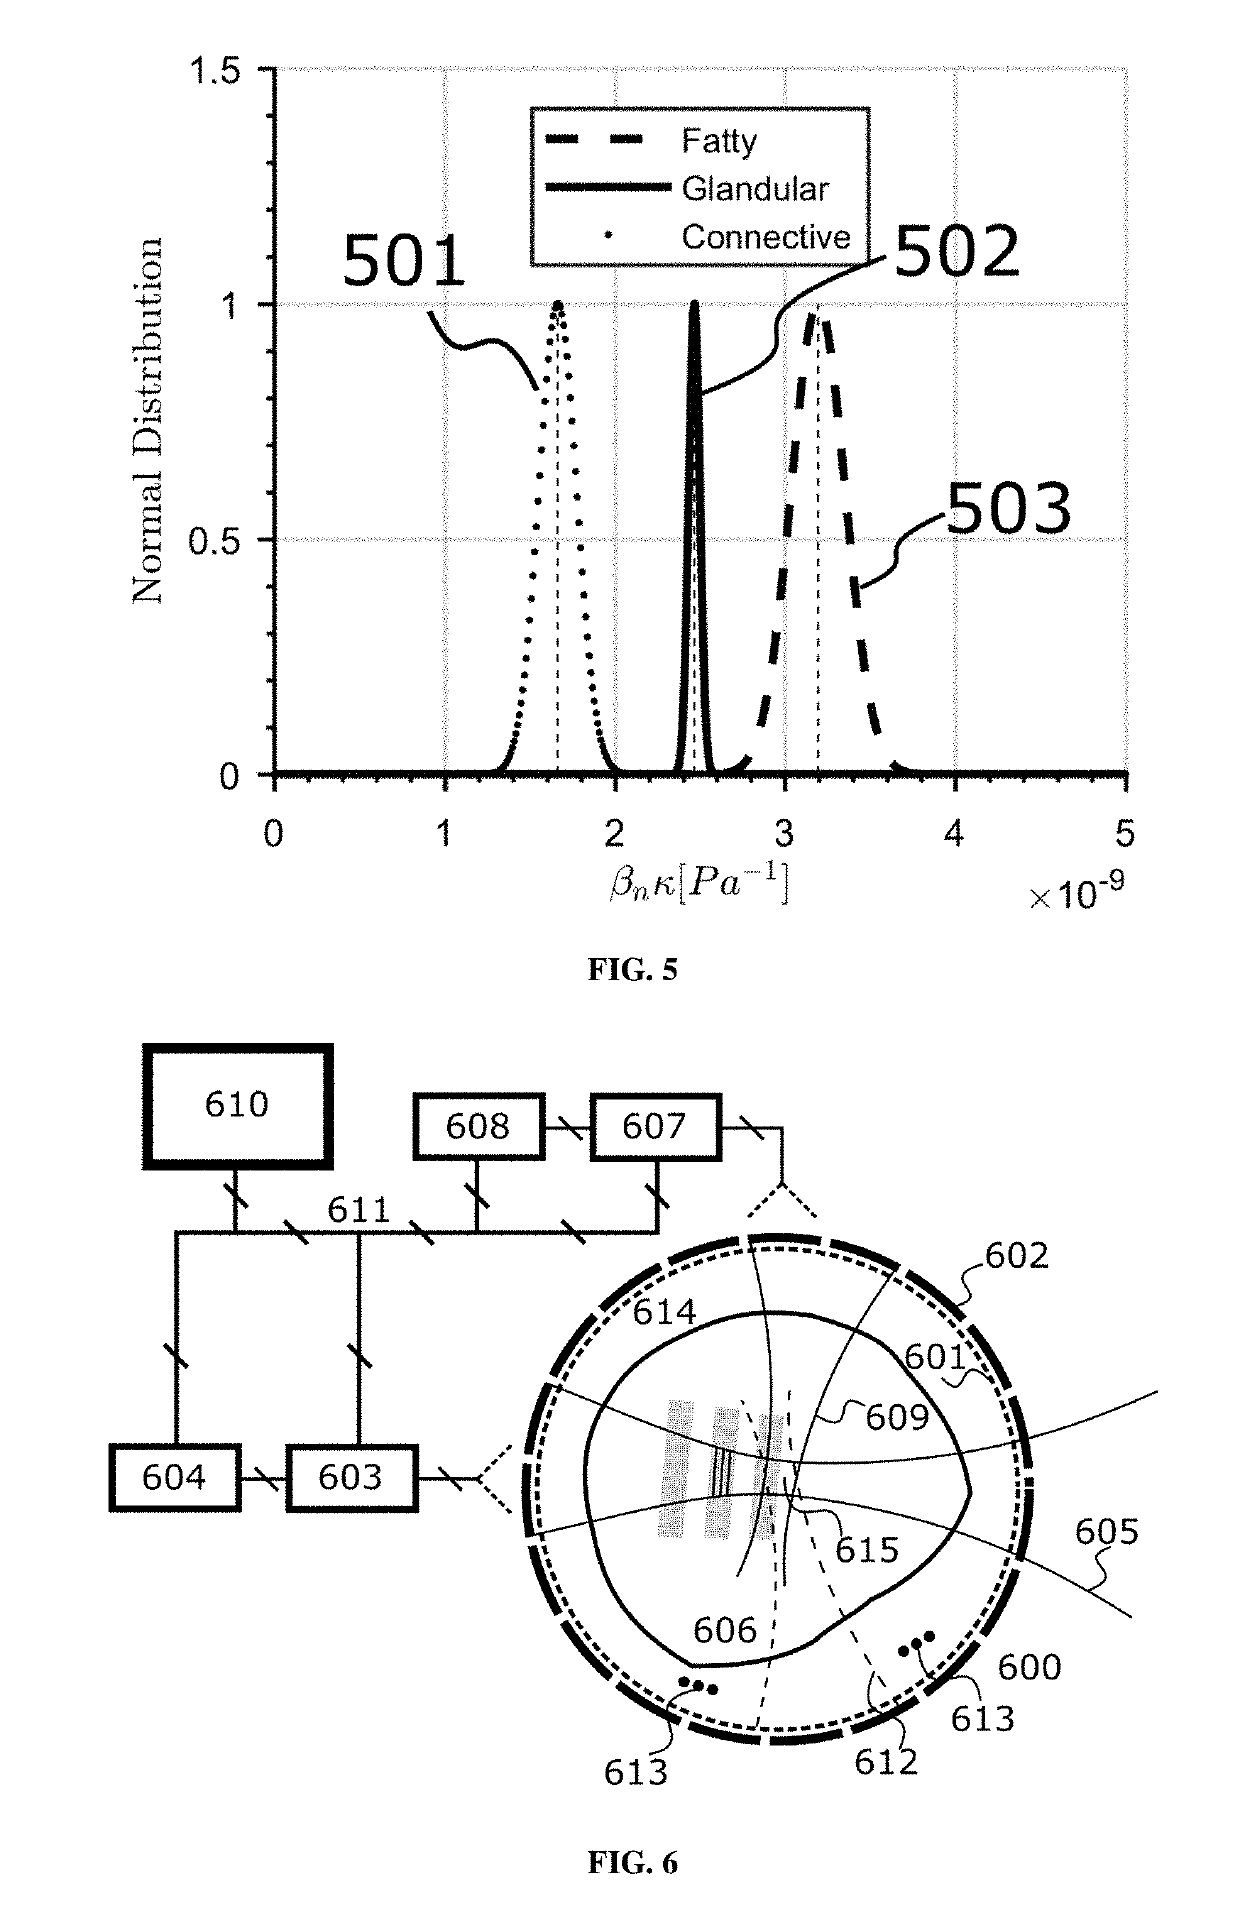 Methods and Instrumentation for Estimation of Wave Propagation and Scattering Parameters